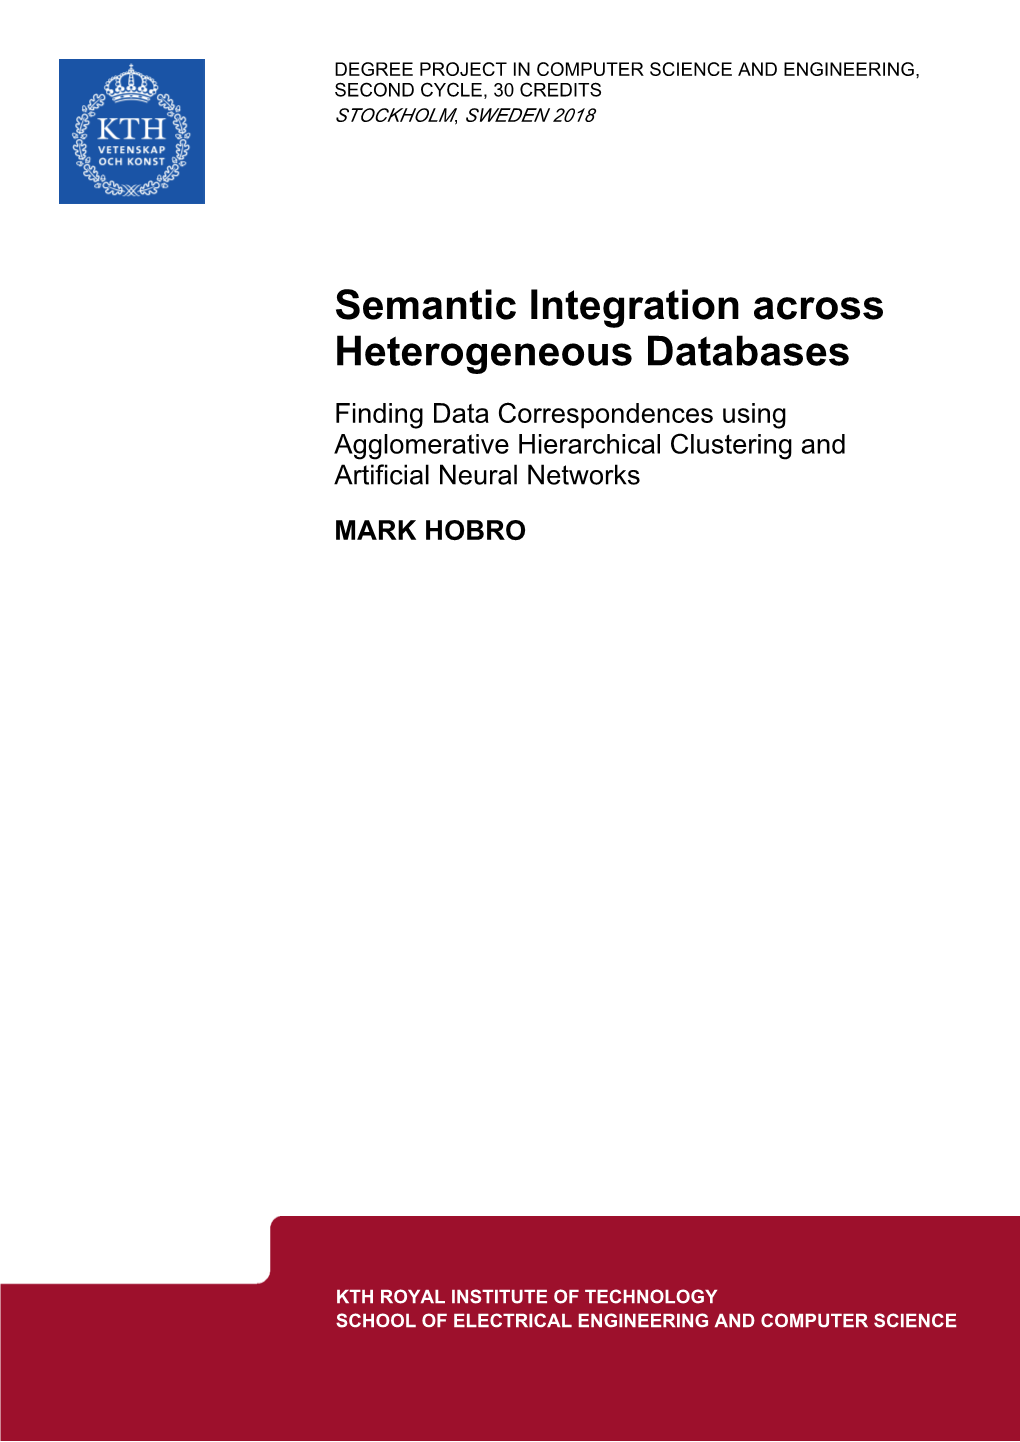 Semantic Integration Across Heterogeneous Databases Finding Data Correspondences Using Agglomerative Hierarchical Clustering and Artificial Neural Networks